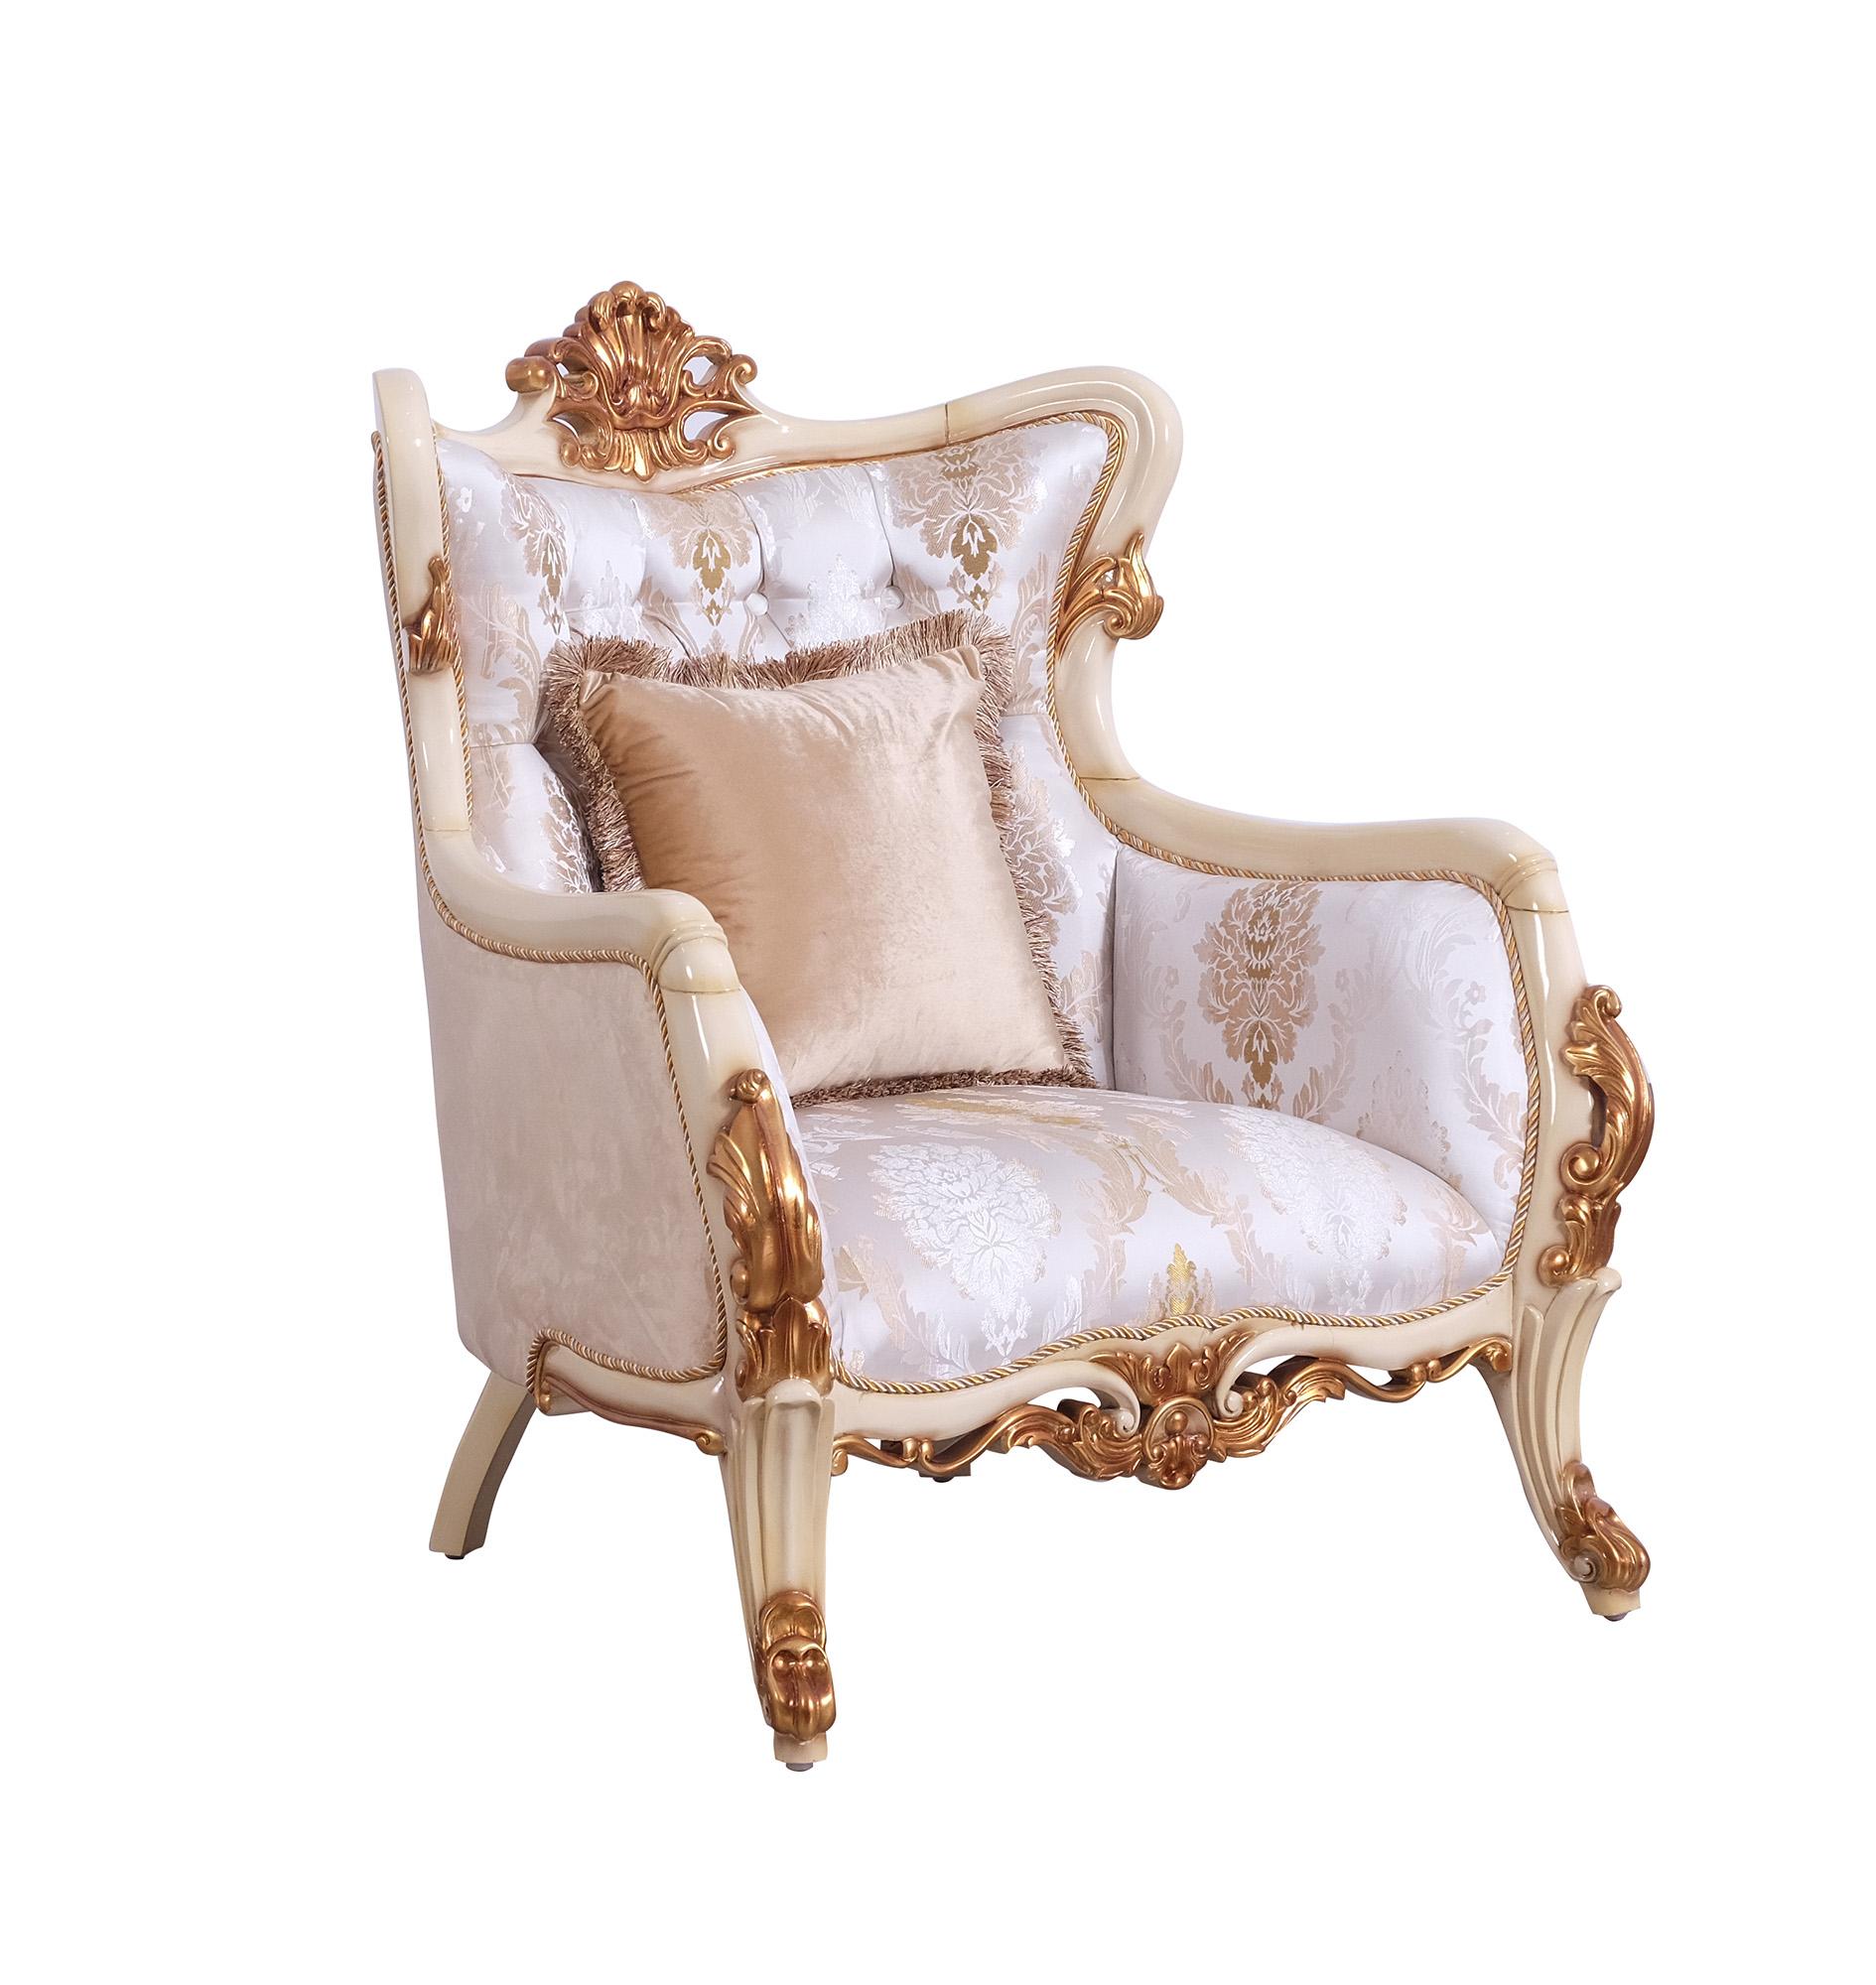 Classic, Traditional Arm Chair VERONICA III 47072-C in Pearl, Antique, Gold Fabric